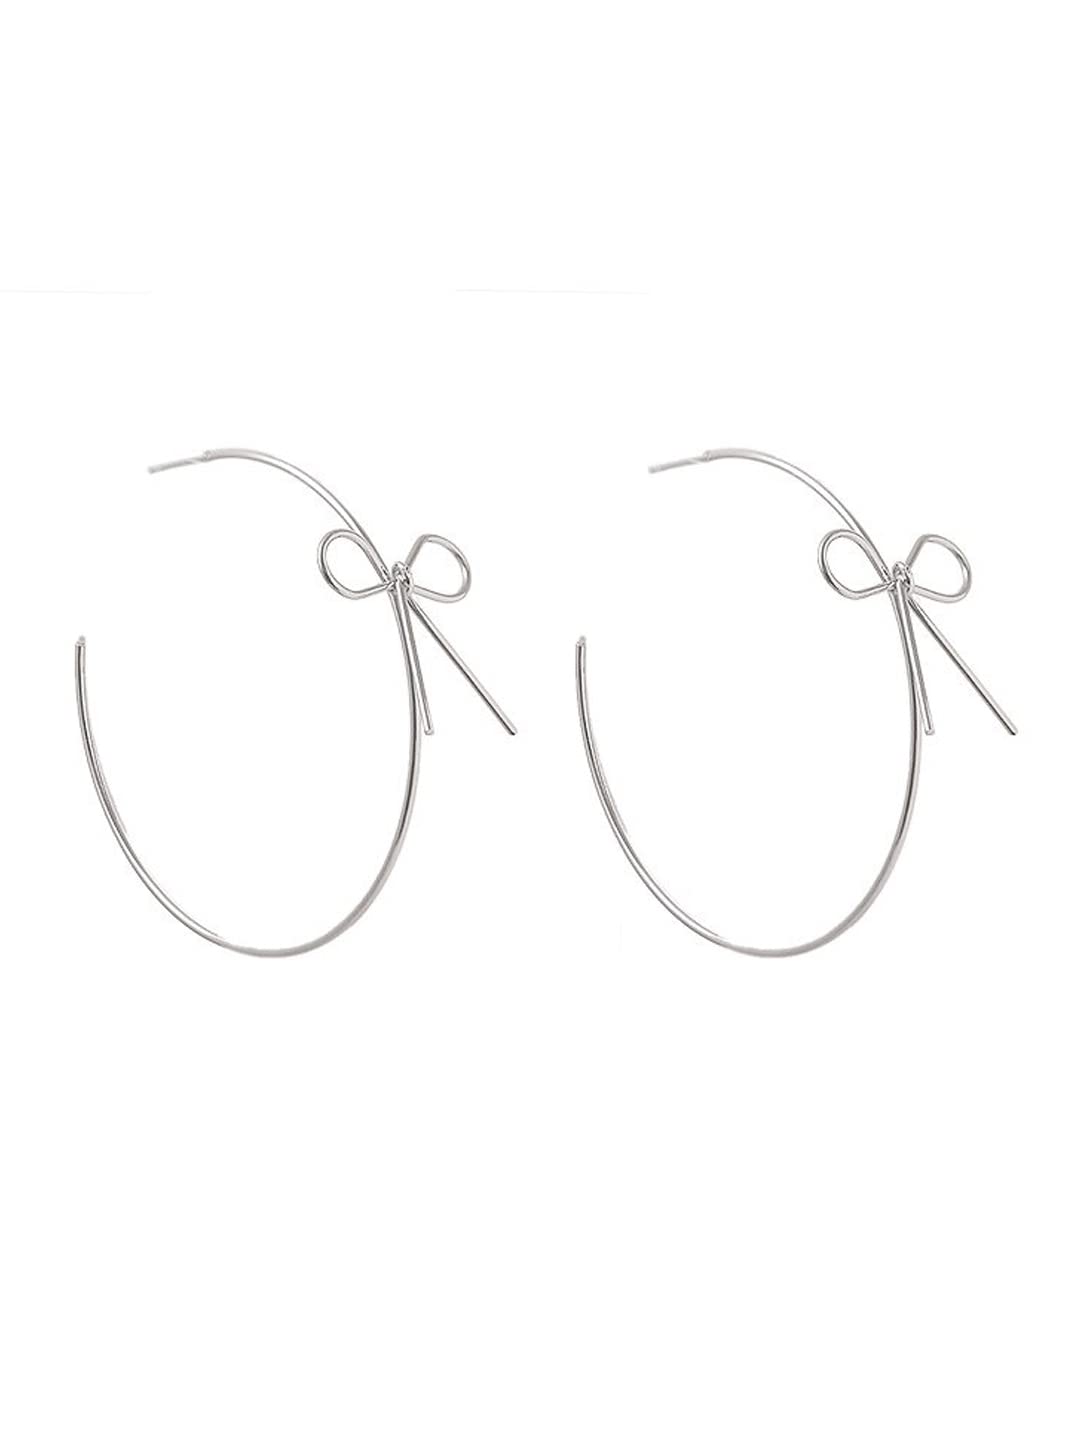 Yellow Chimes Earrings for Women and Girls Hoop Earrings for Girls | Silver Toned Bow Designed Hoop Earrings | Birthday Gift for girls and women Anniversary Gift for Wife